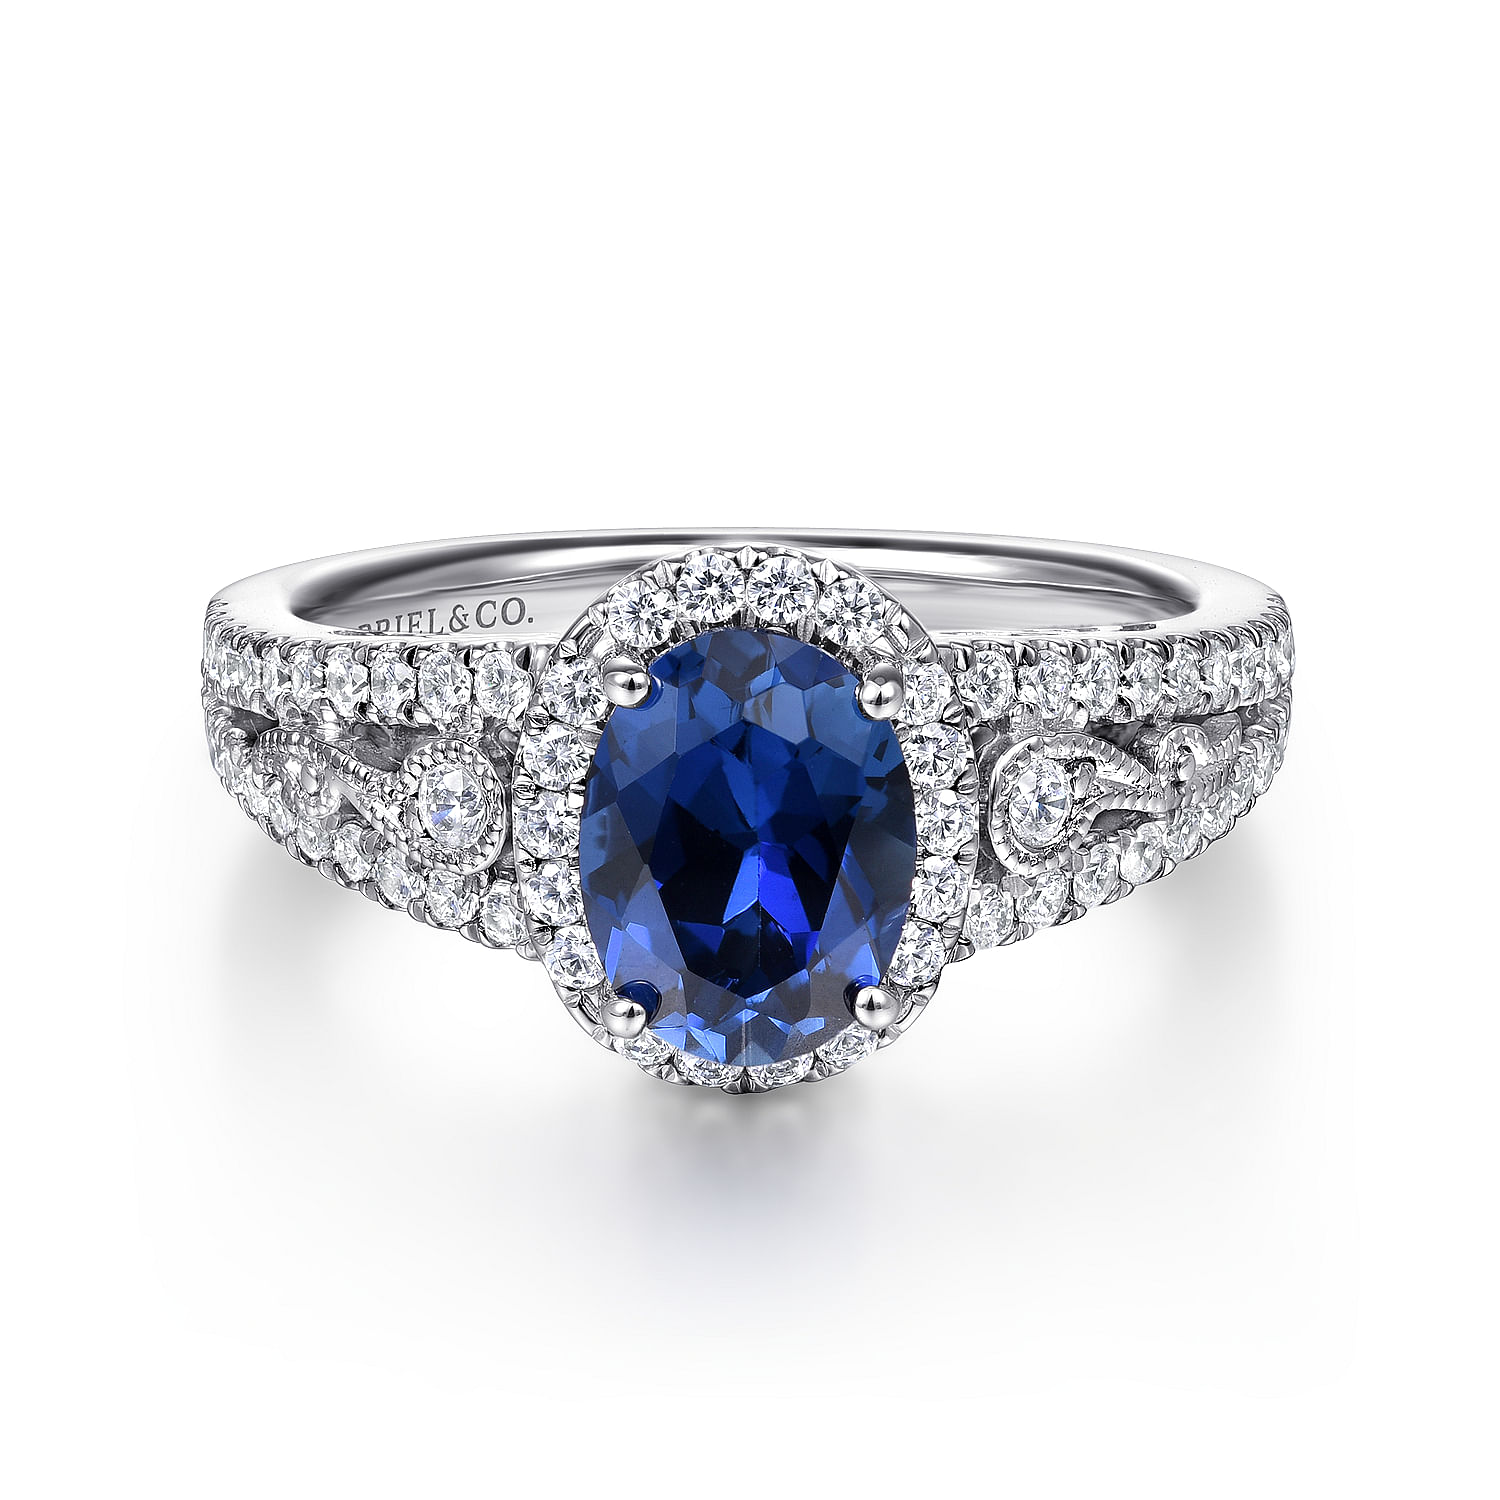 Nayana---14K-White-Gold-Oval-Halo-Sapphire-and-Diamond-Engagement-Ring1